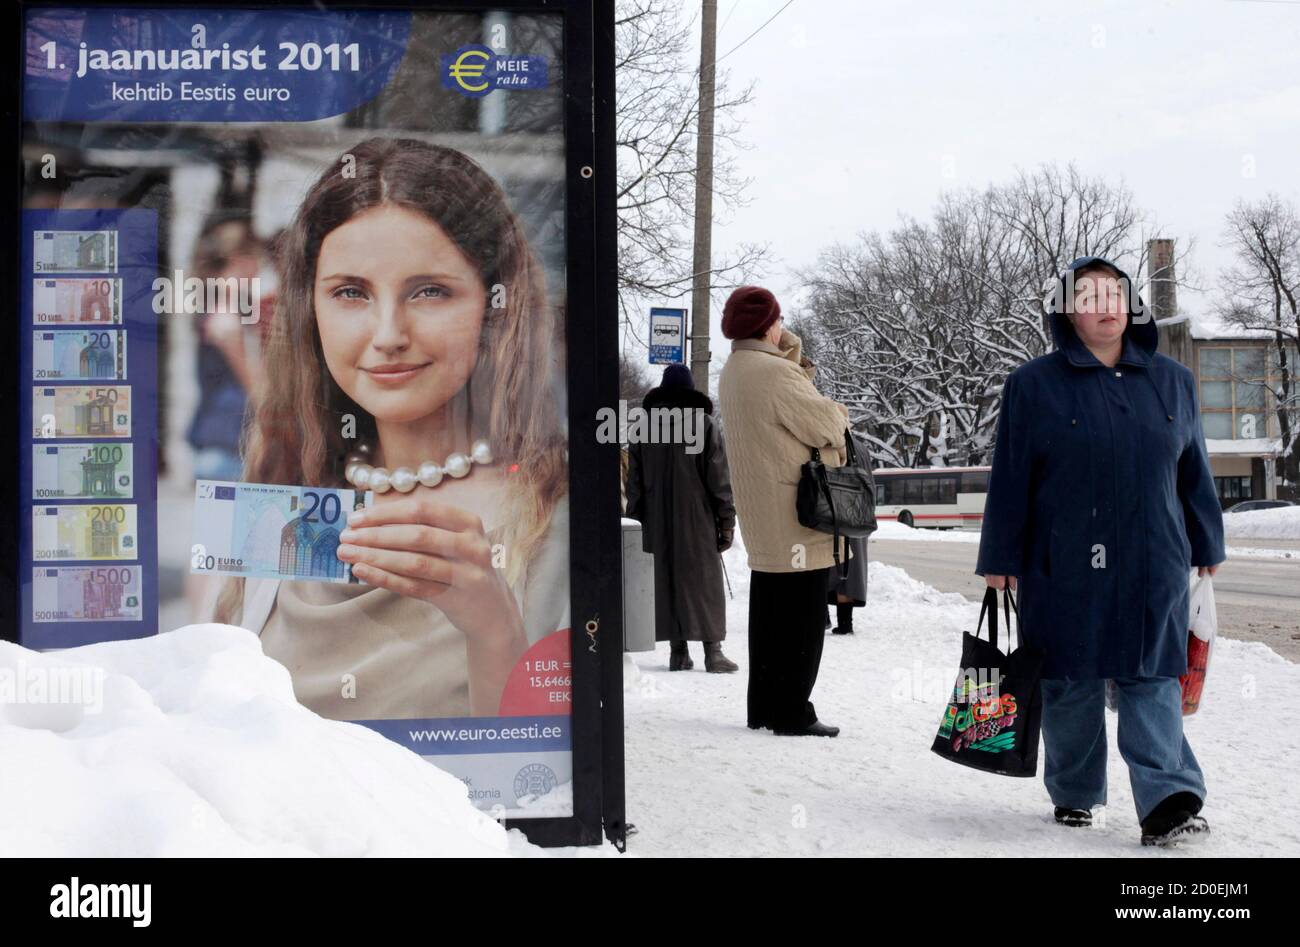 A woman carries shopping bags as she passes a poster informing people about the adoption of the Euro in Parnu December 28, 2010. Estonia will join the Euro zone on January 1, 2011. REUTERS/Ints Kalnins (ESTONIA - Tags: BUSINESS) Stock Photo